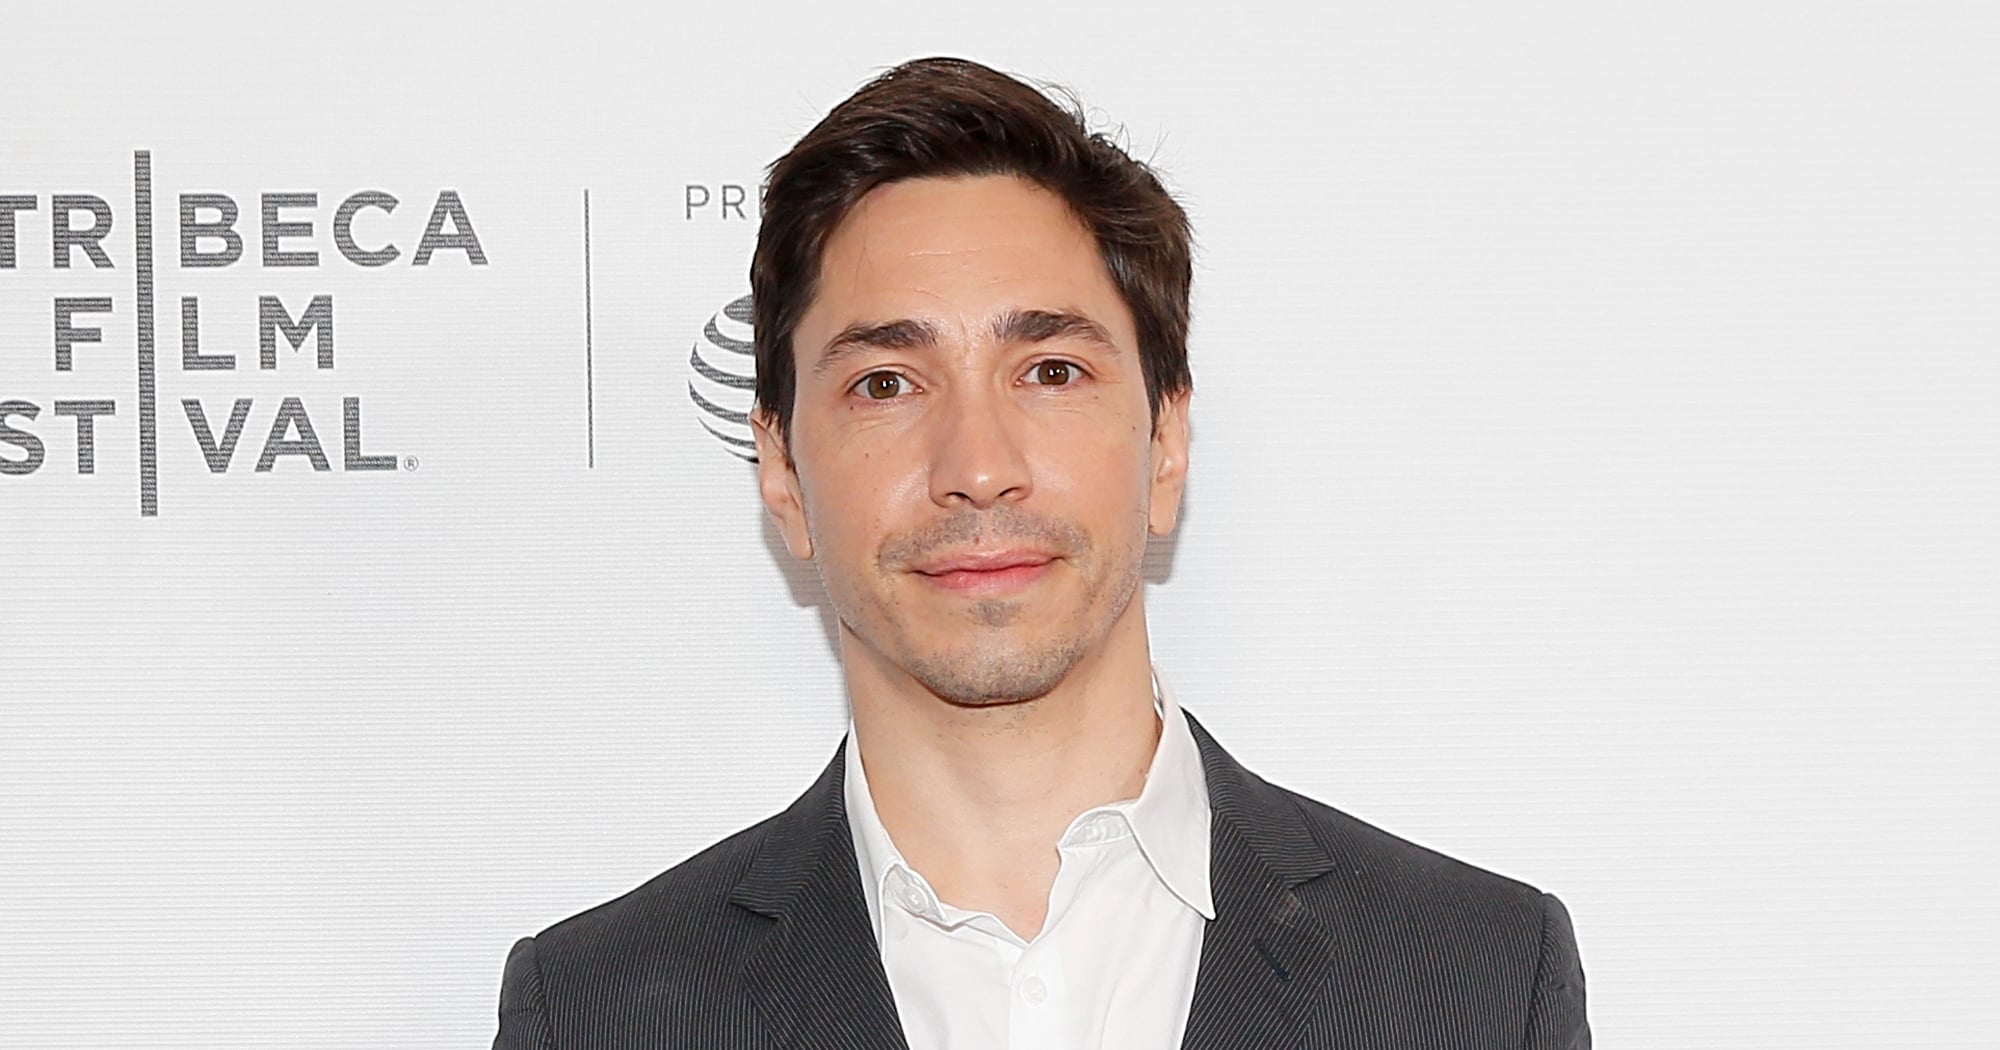 Who Is Justin Long Dating?